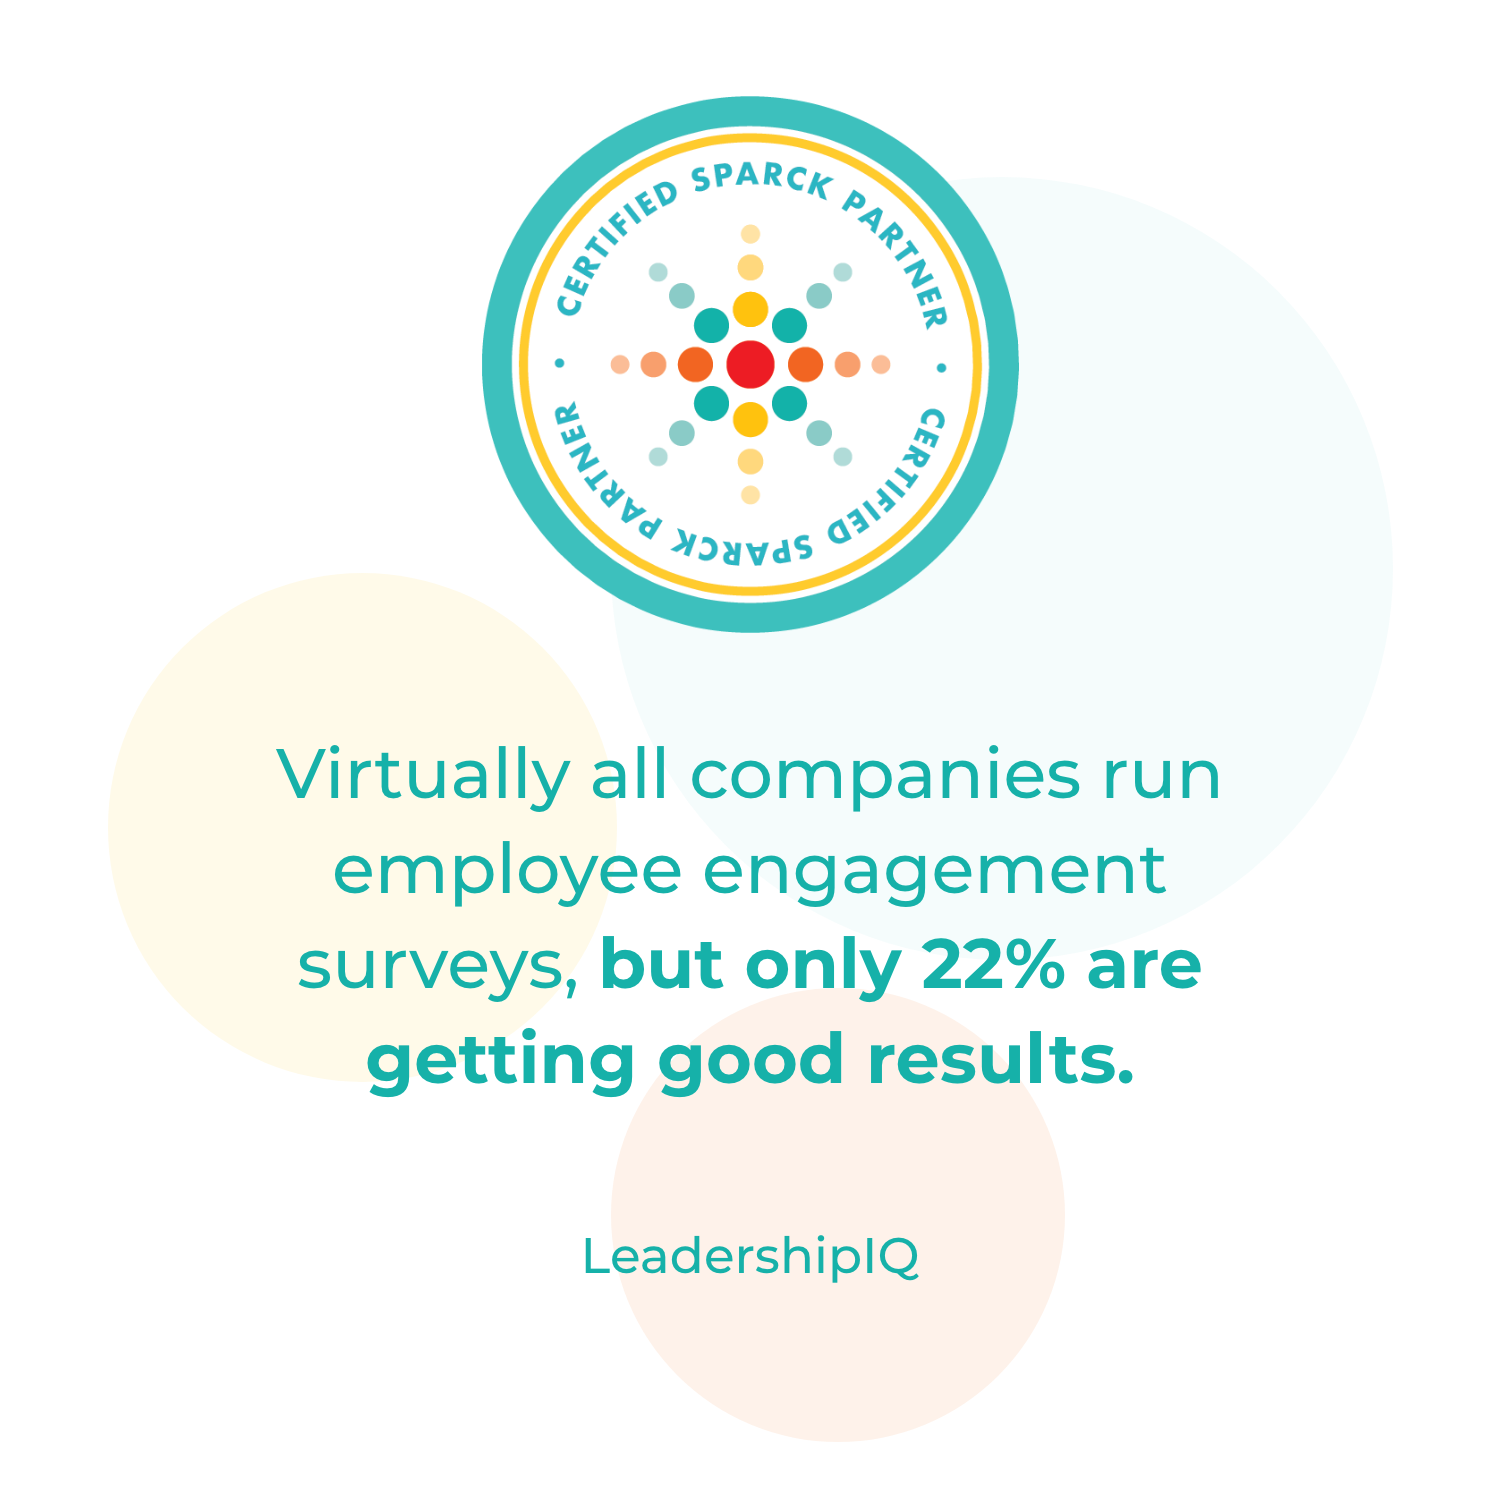 Virtually all companies run employee engagement surveys, but only 22% are getting good results.